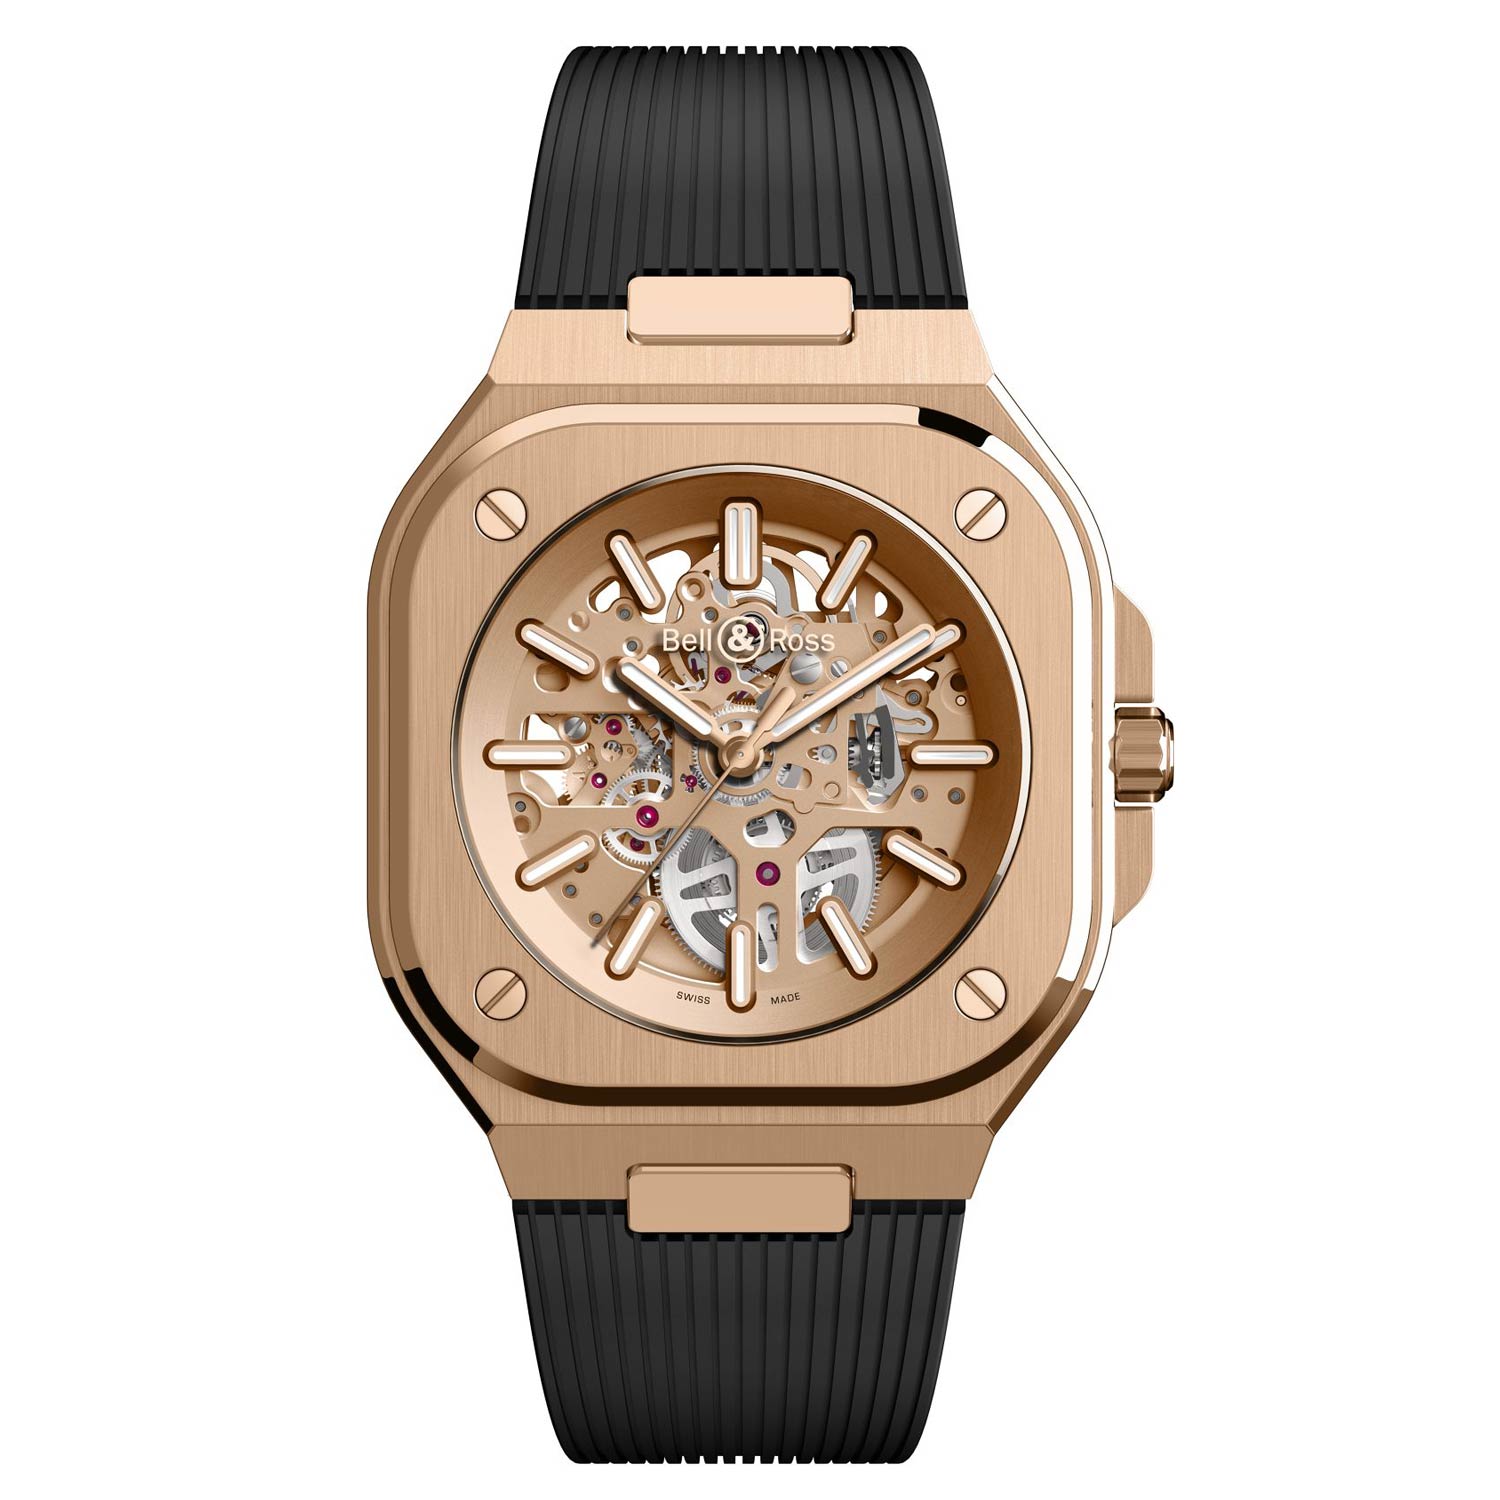 The ‘BR 05 Skeleton Gold’ features an open dial with rose gold gilded appliqué